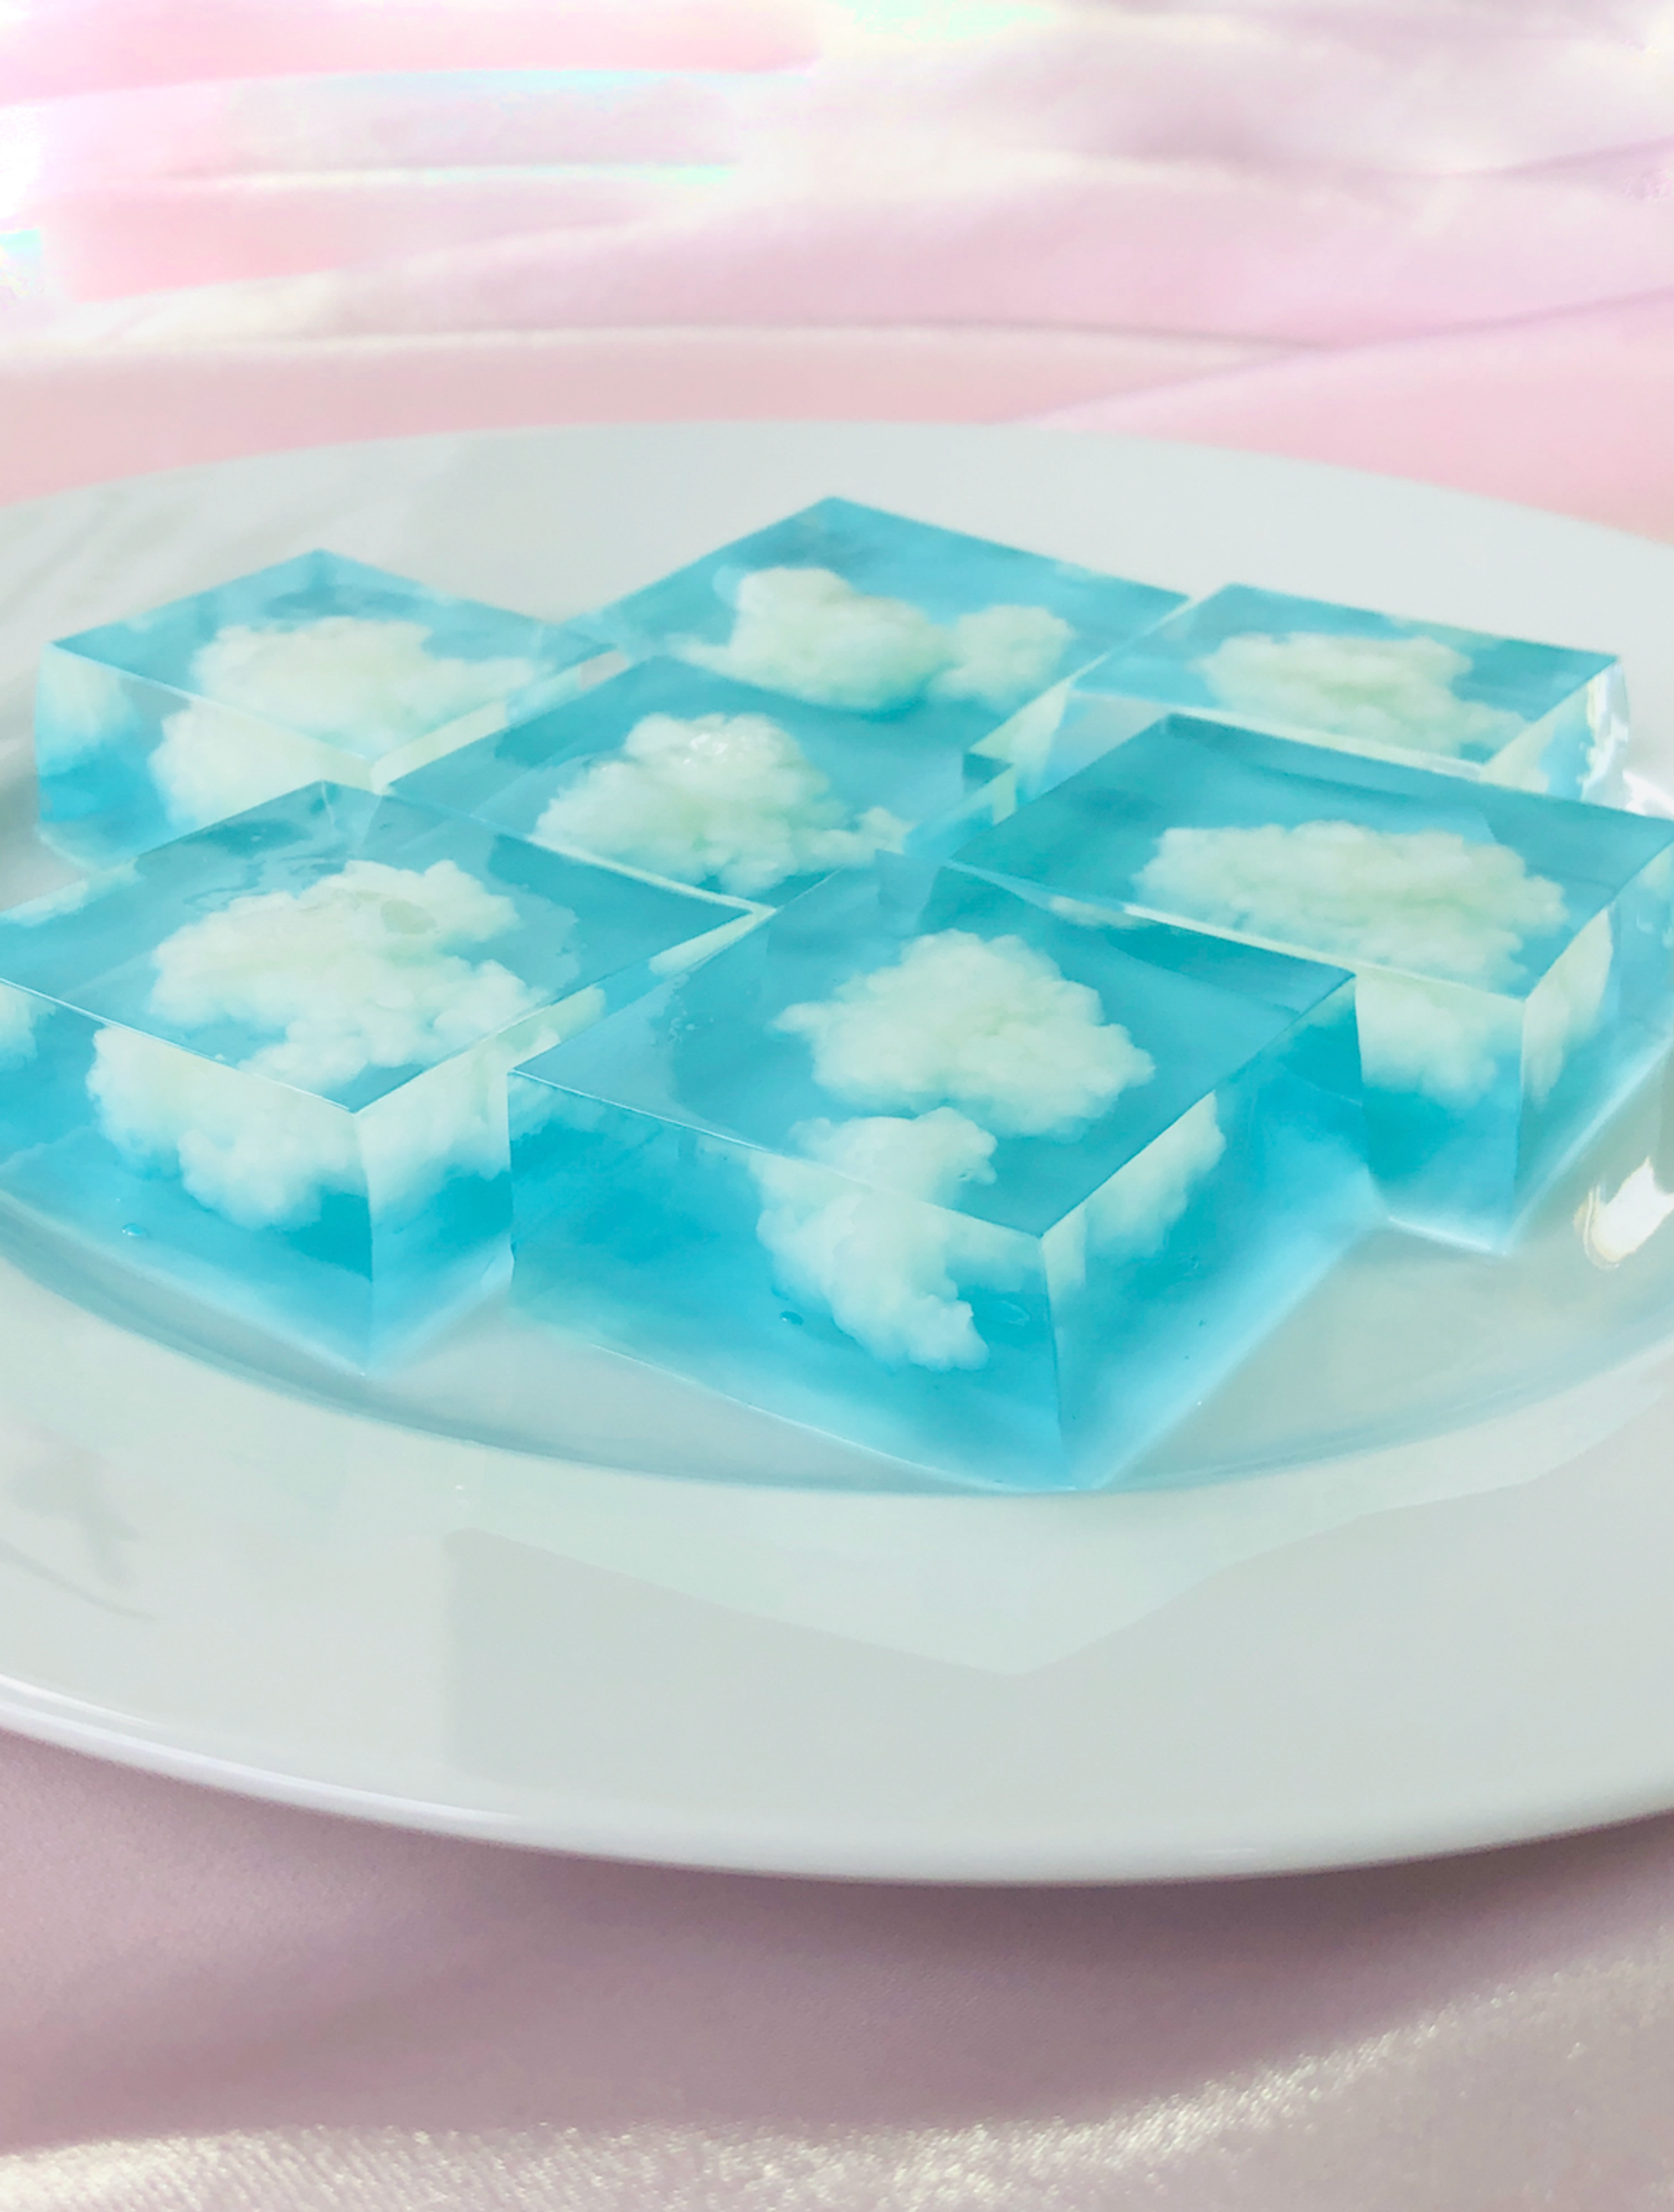 Jello that looks like a sunny day with blue skies and fluffy white clouds